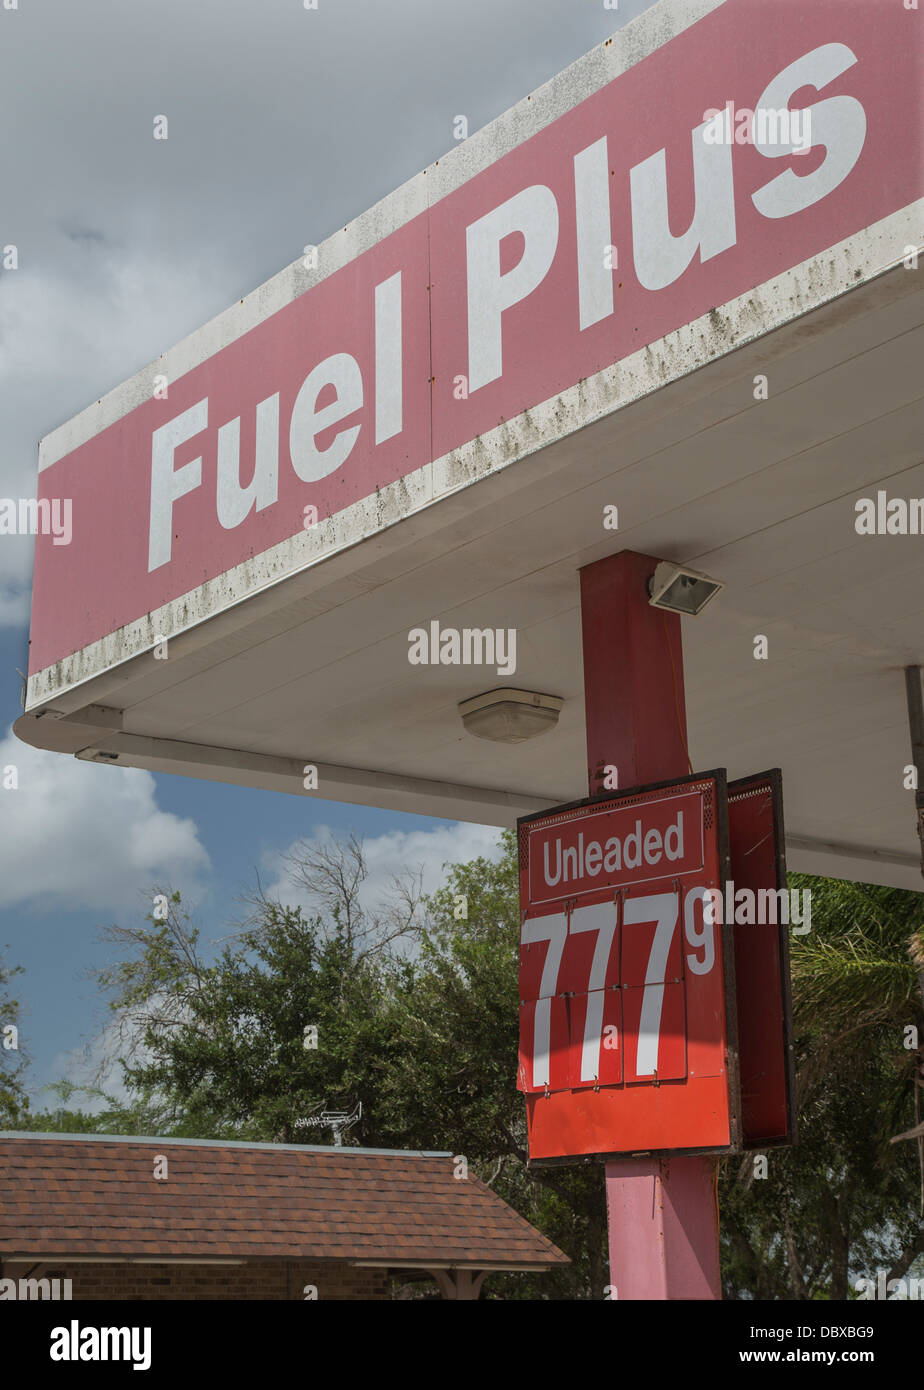 El Ranchito, Texas - A price of $7.77 per gallon posted at a closed gas station. Stock Photo